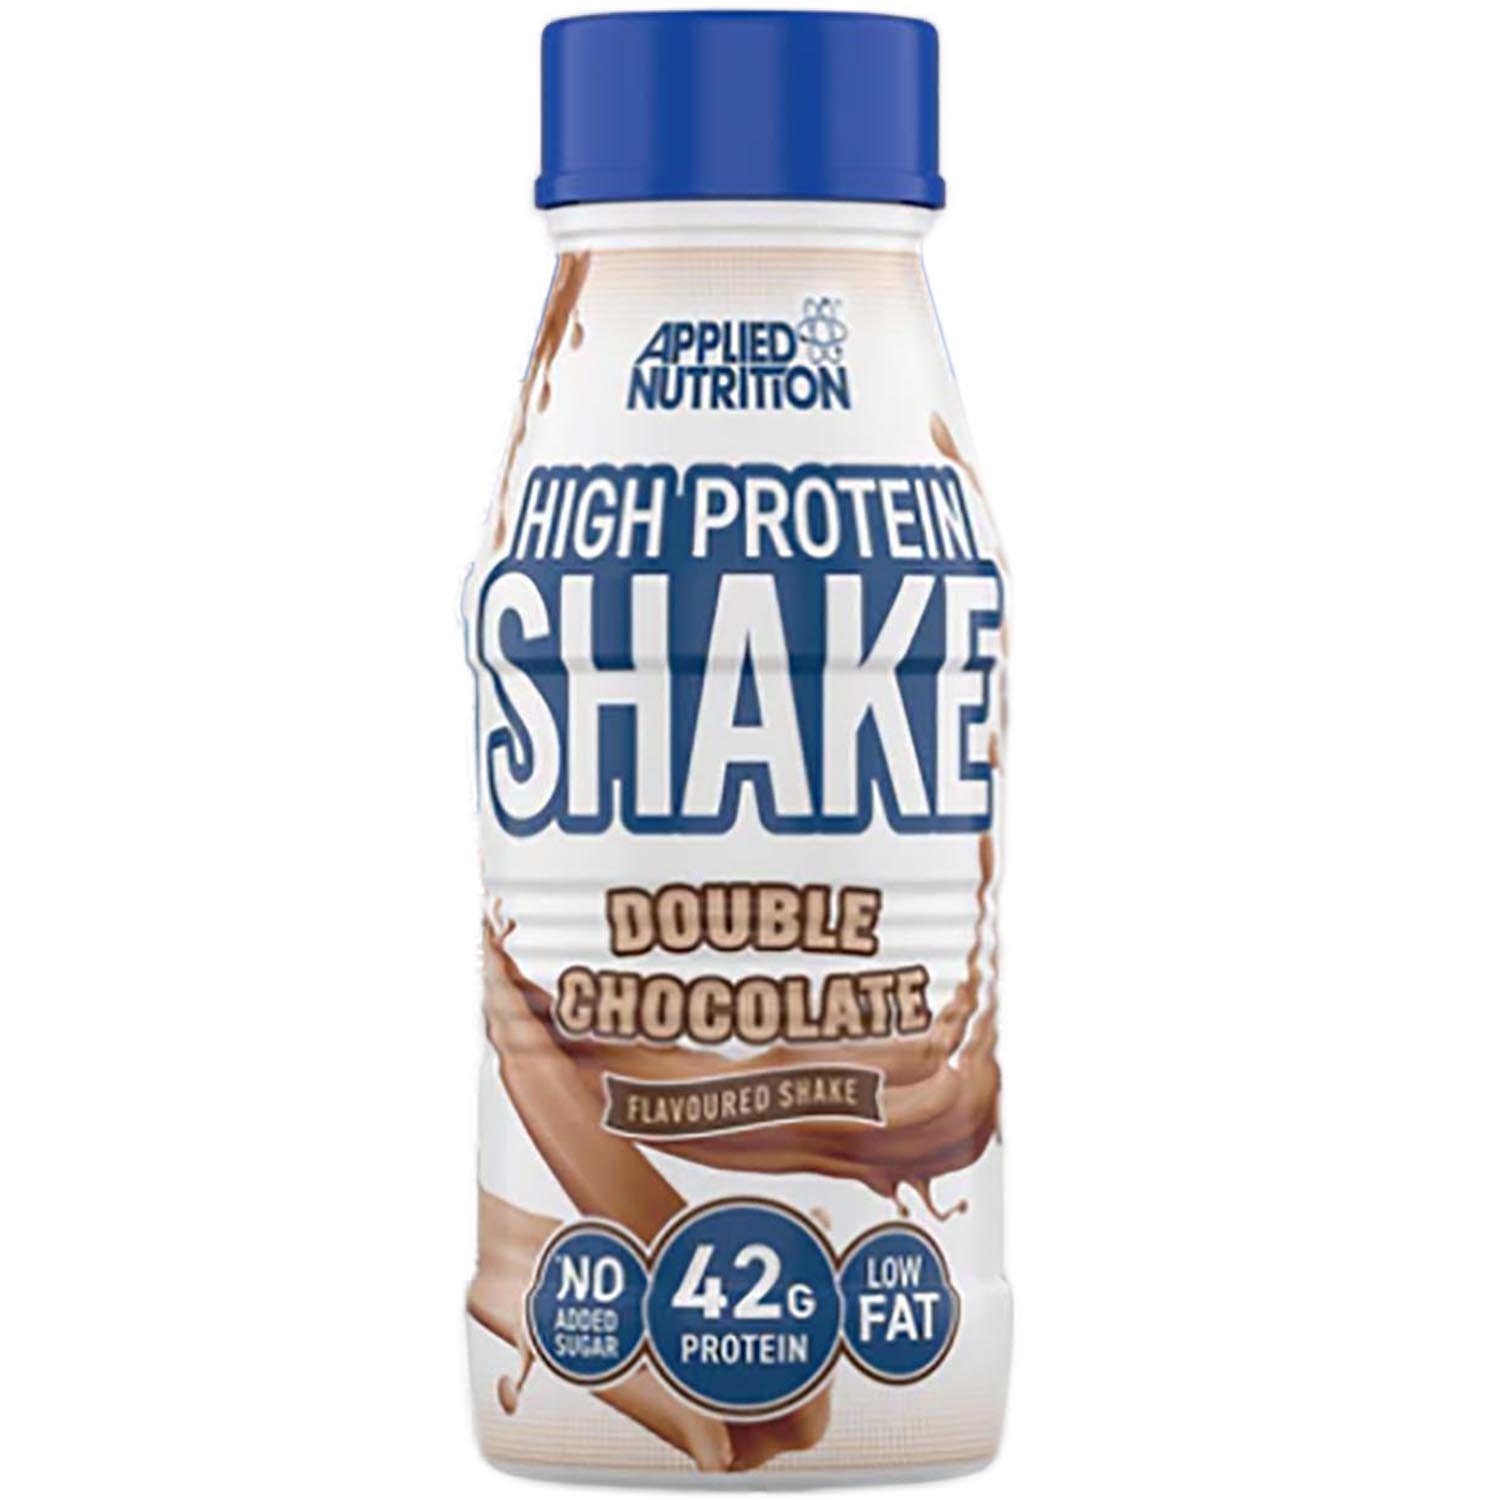 High Protein Double Chocolate Shake Image 1